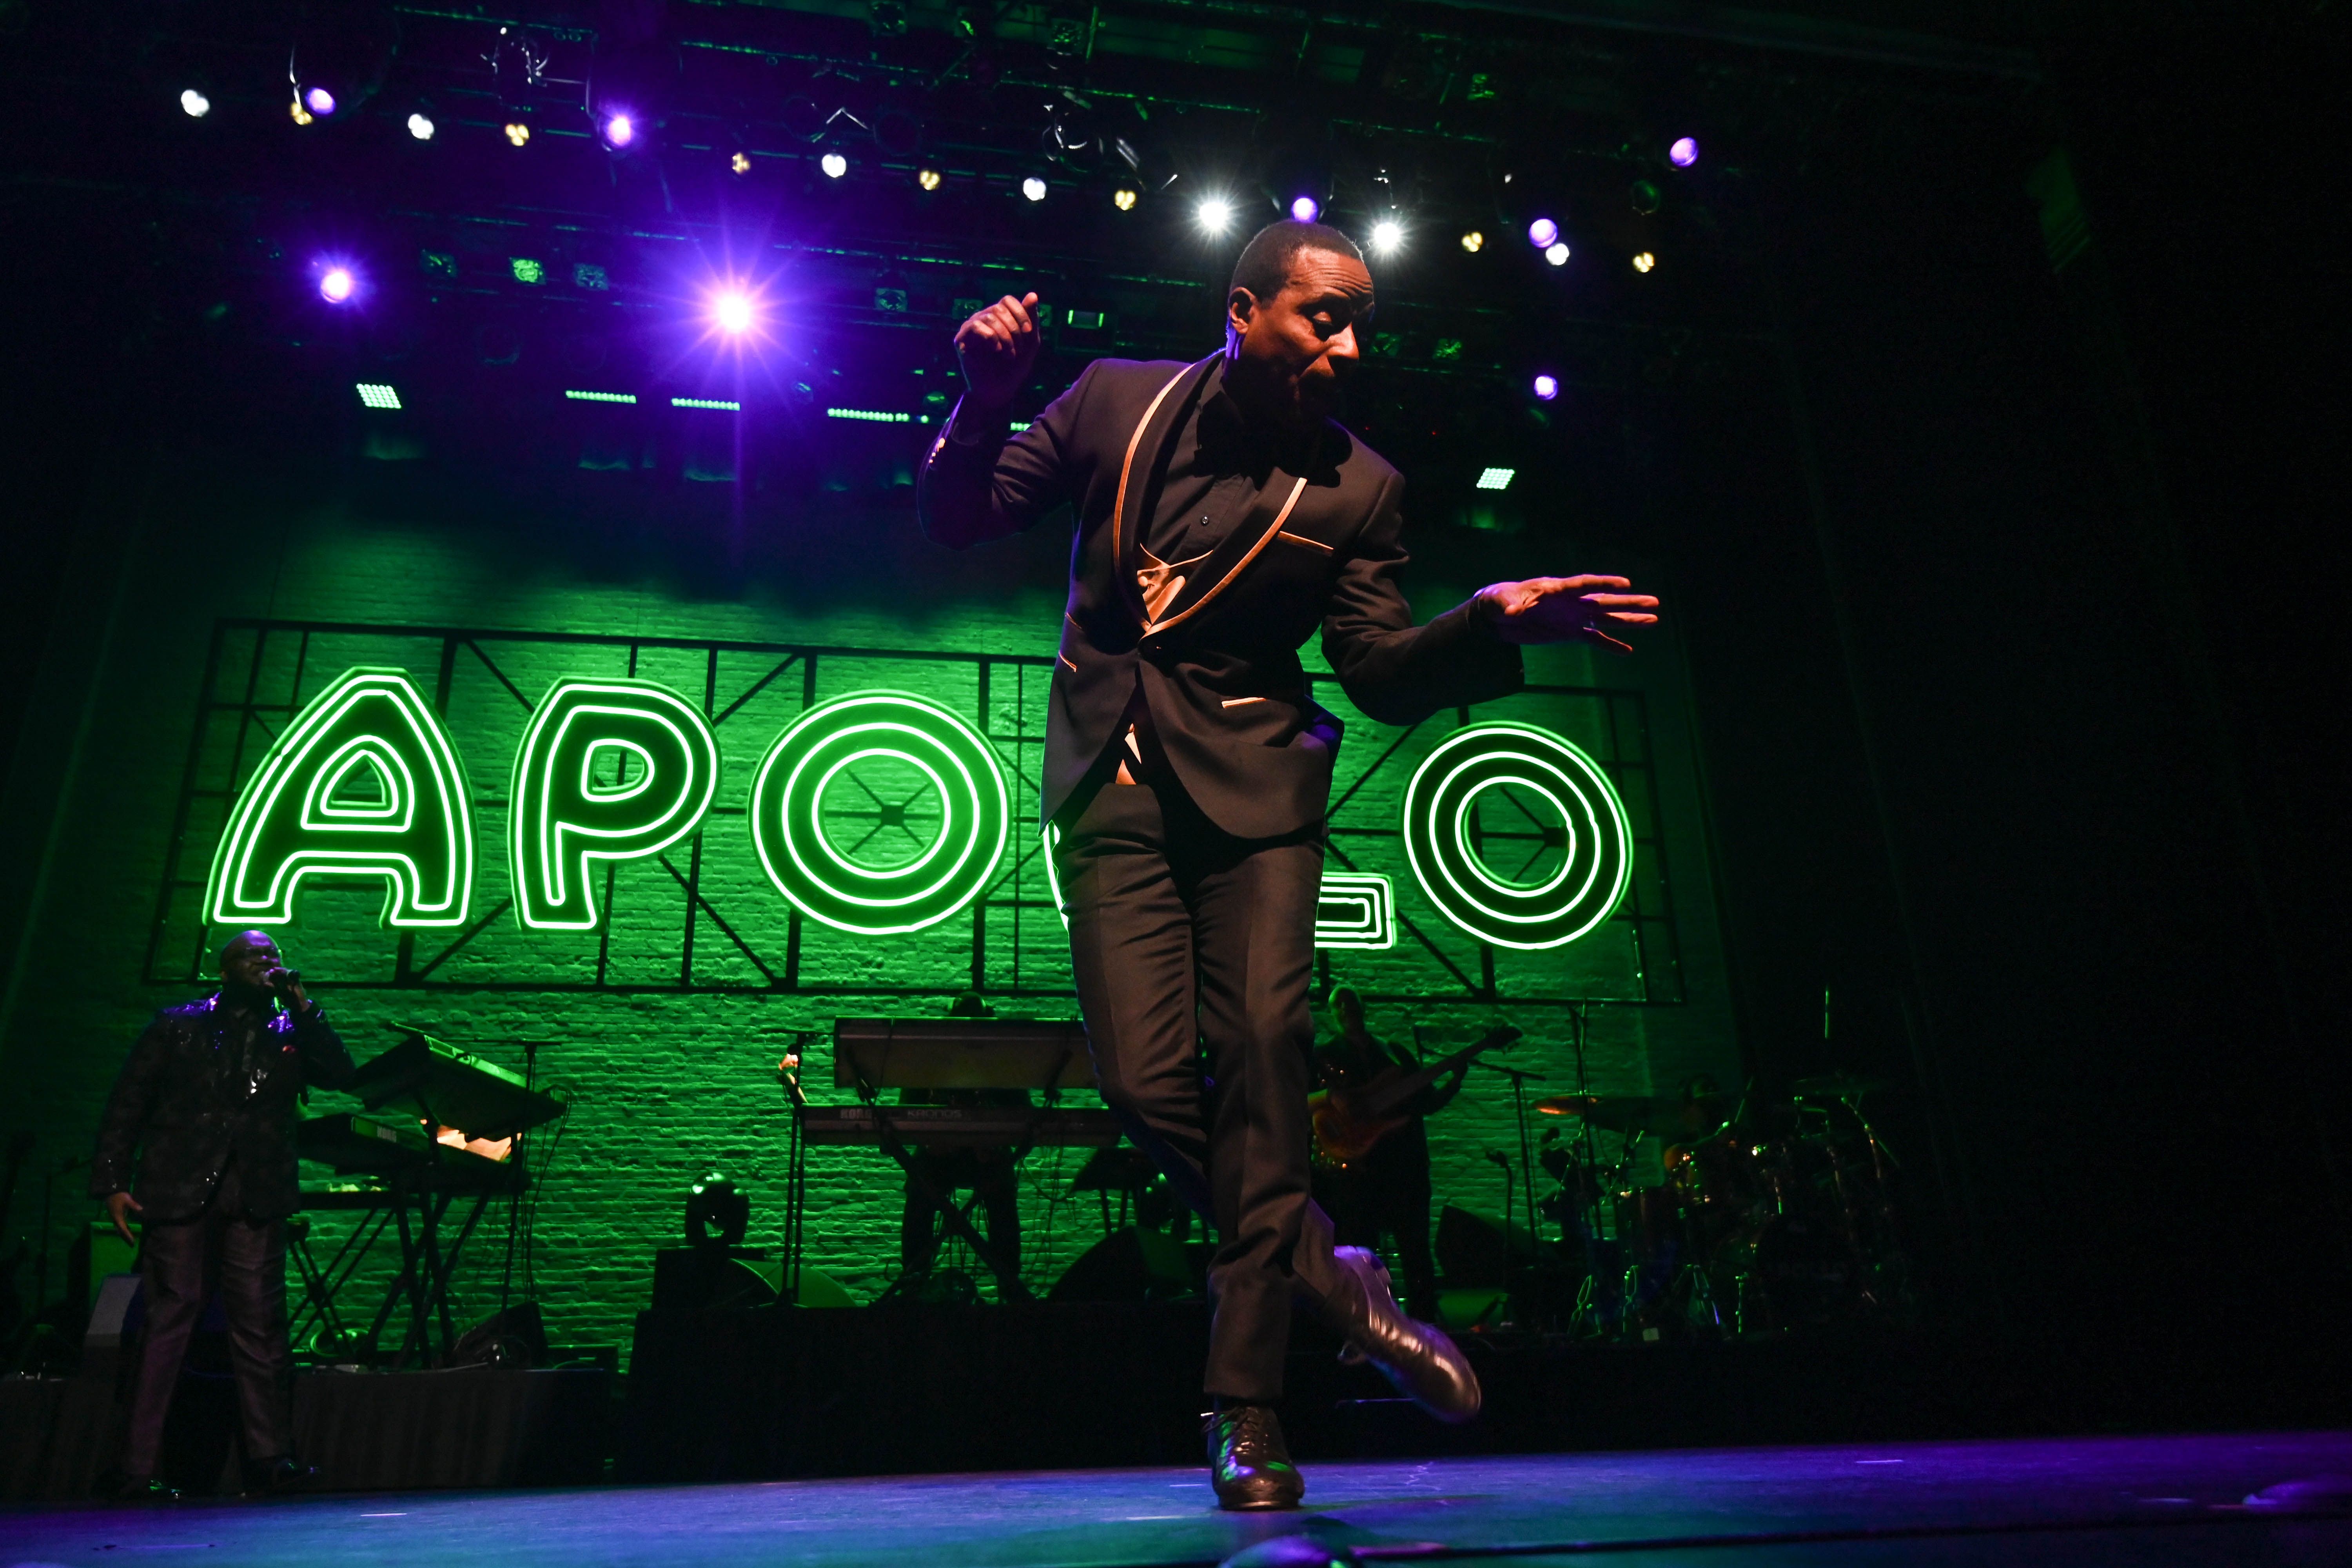 Image of Apollo Amateur Night Executioner, C.P. Lacey, wearing a black suit dancing on stage in front of a green neon sign reading the word Apollo.